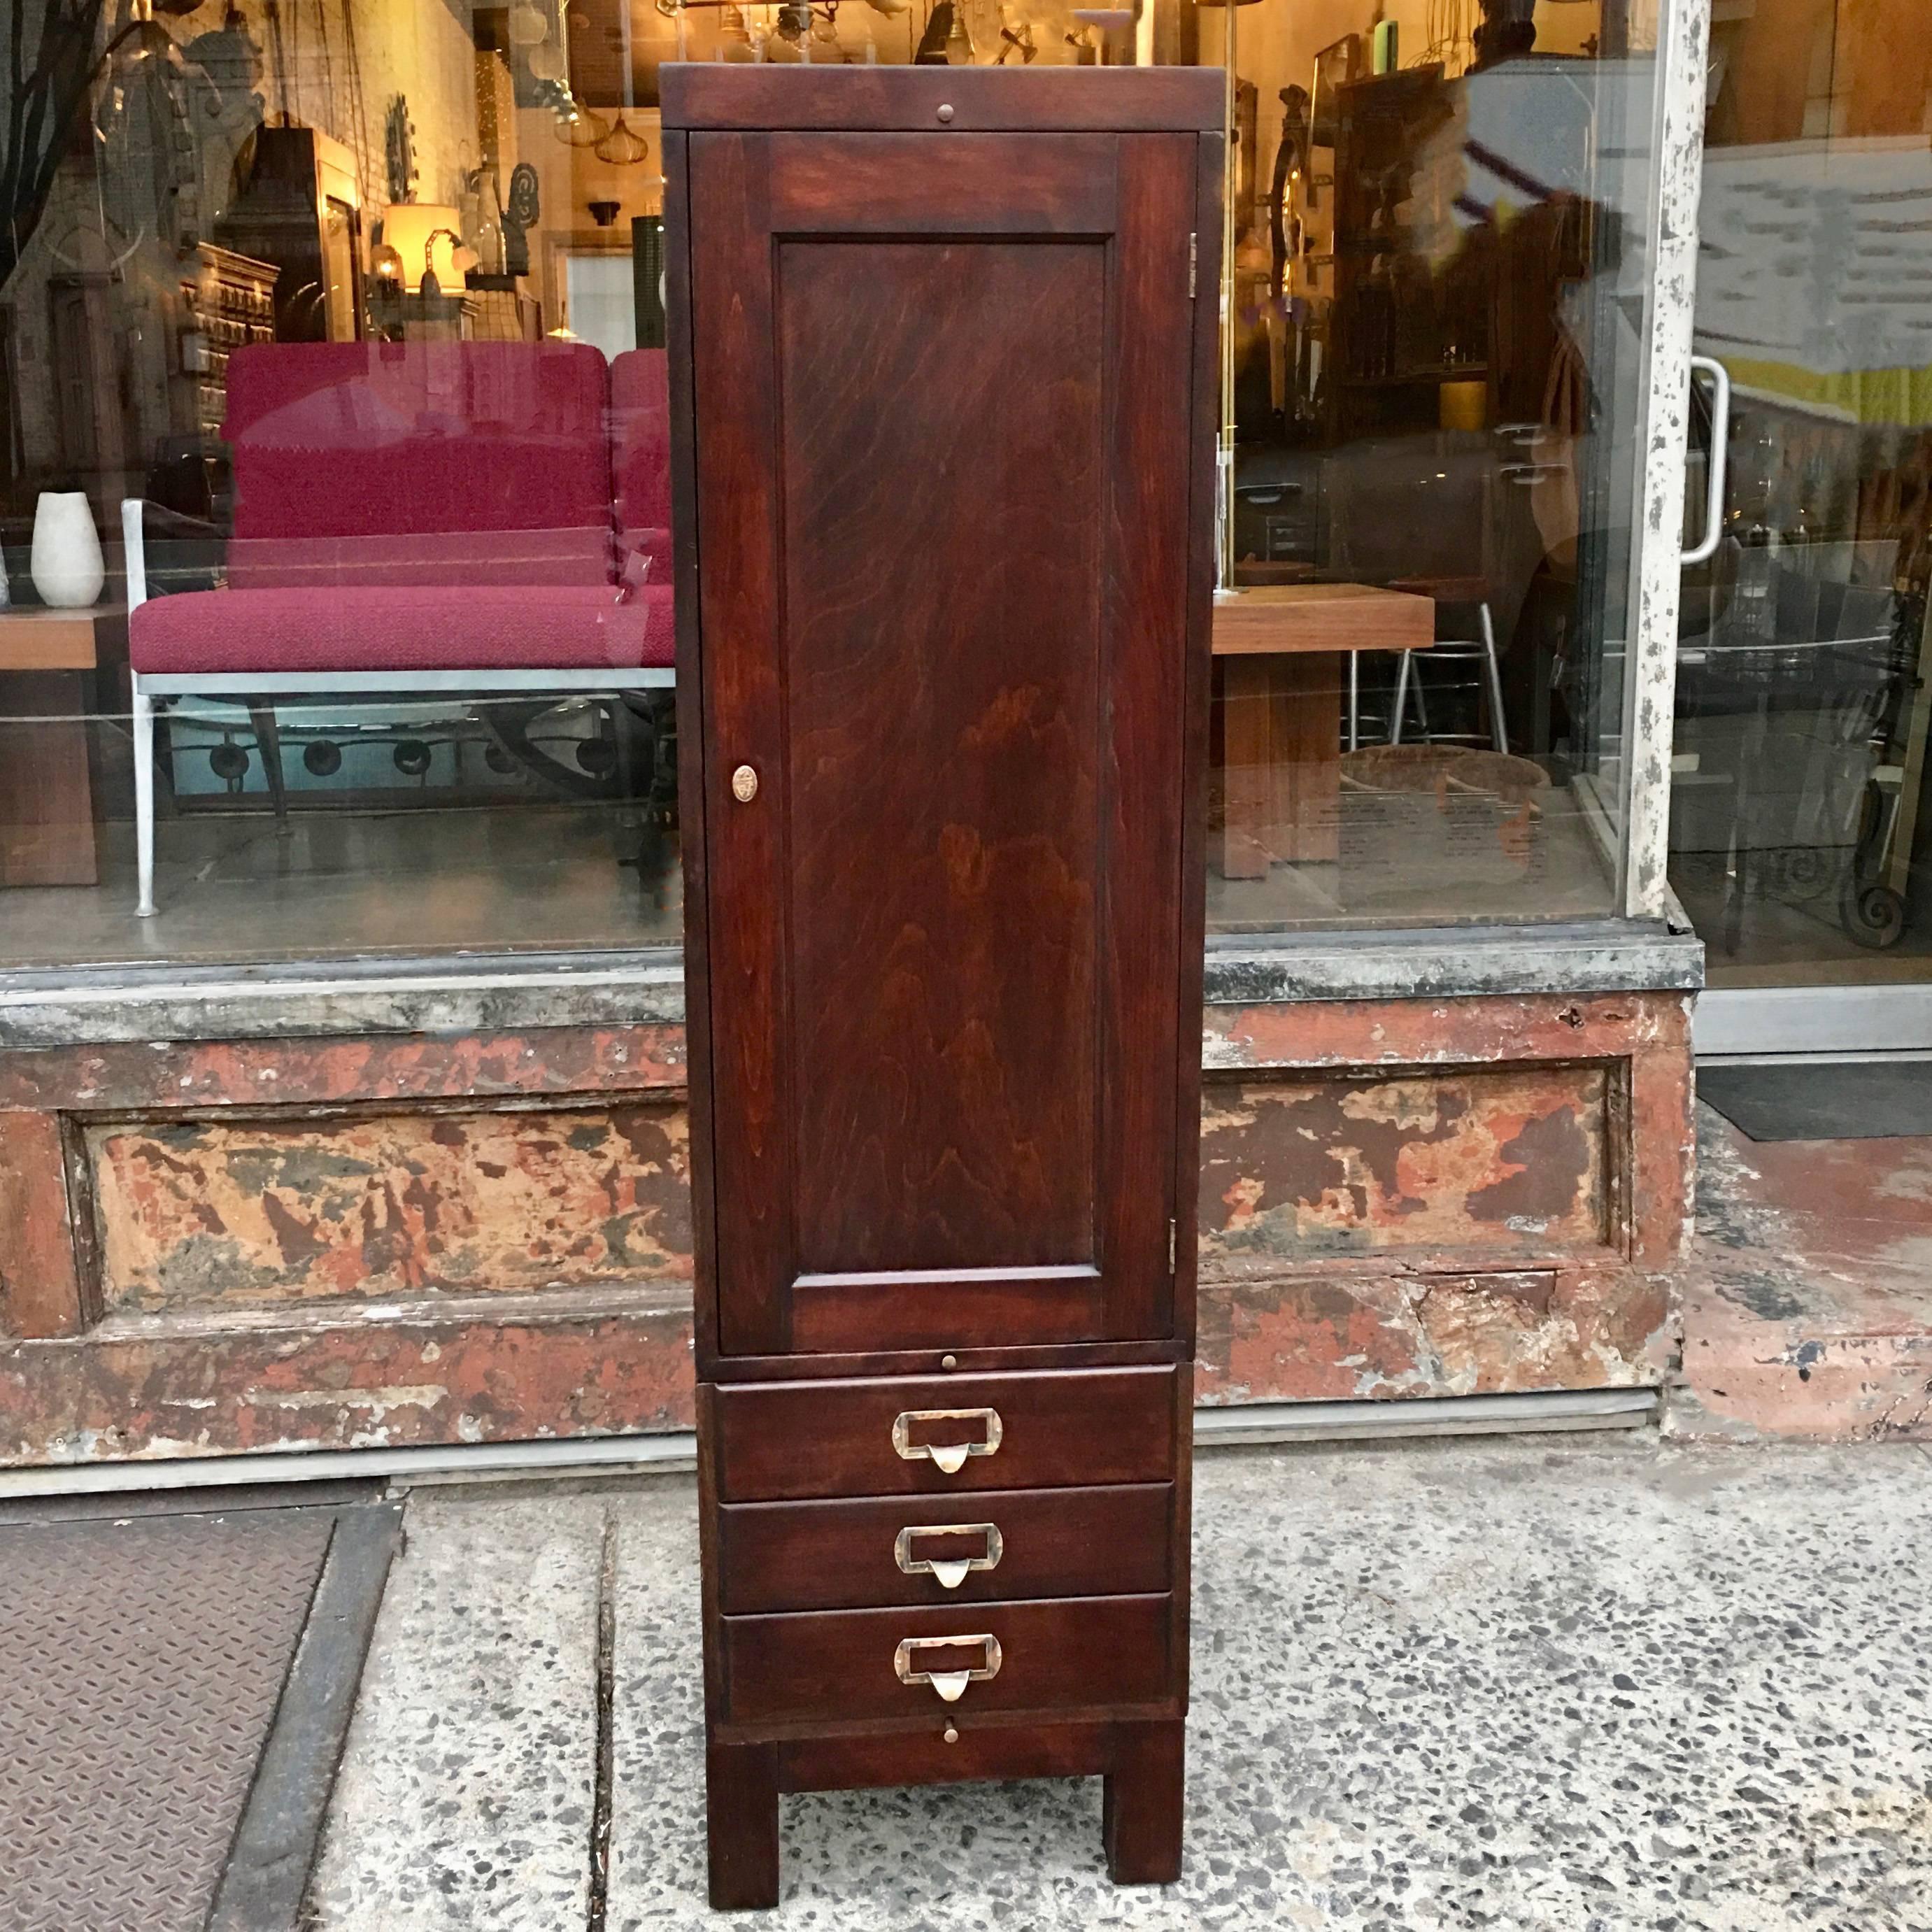 1920s, office, wardrobe cabinet or locker is comprised of mahogany stackable components with paneled sides and brass accents. The top portion is open and the bottom consists of three drawers. Interior top portion is 35.5 inches ht x 17.5 inches D x